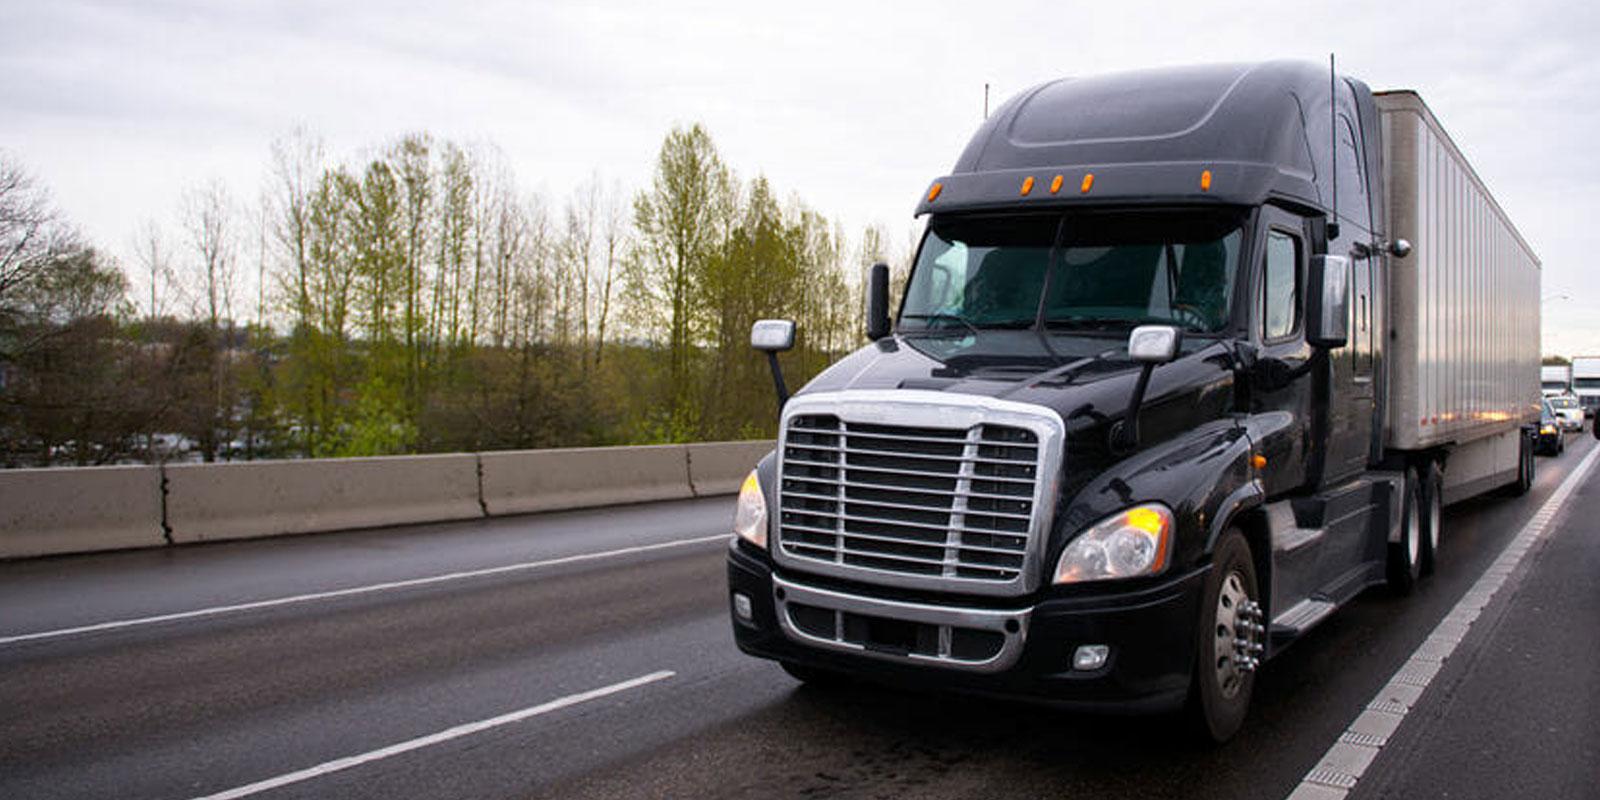 What Is A Trucking Company's CSA Score And Why Is It Important?